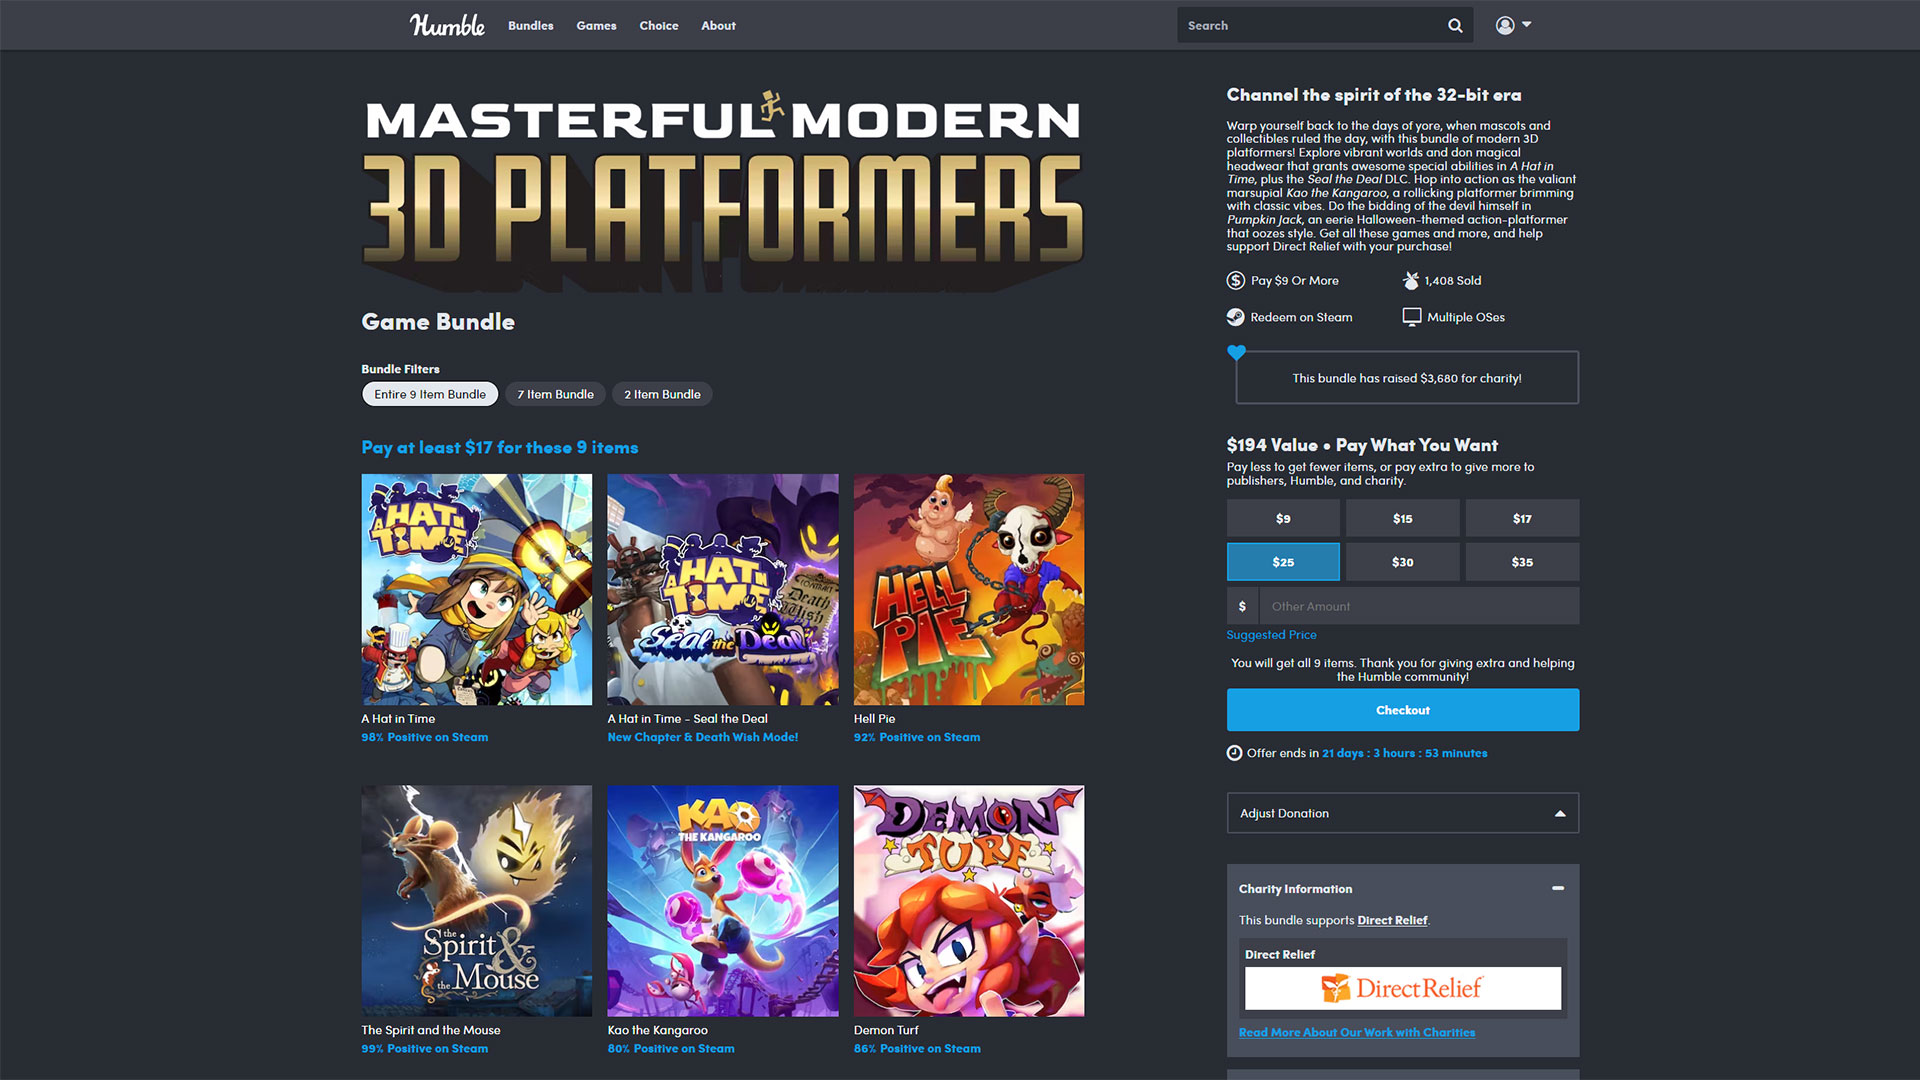 The Masterful Modern 3D Platformers bundle is now available at Humble